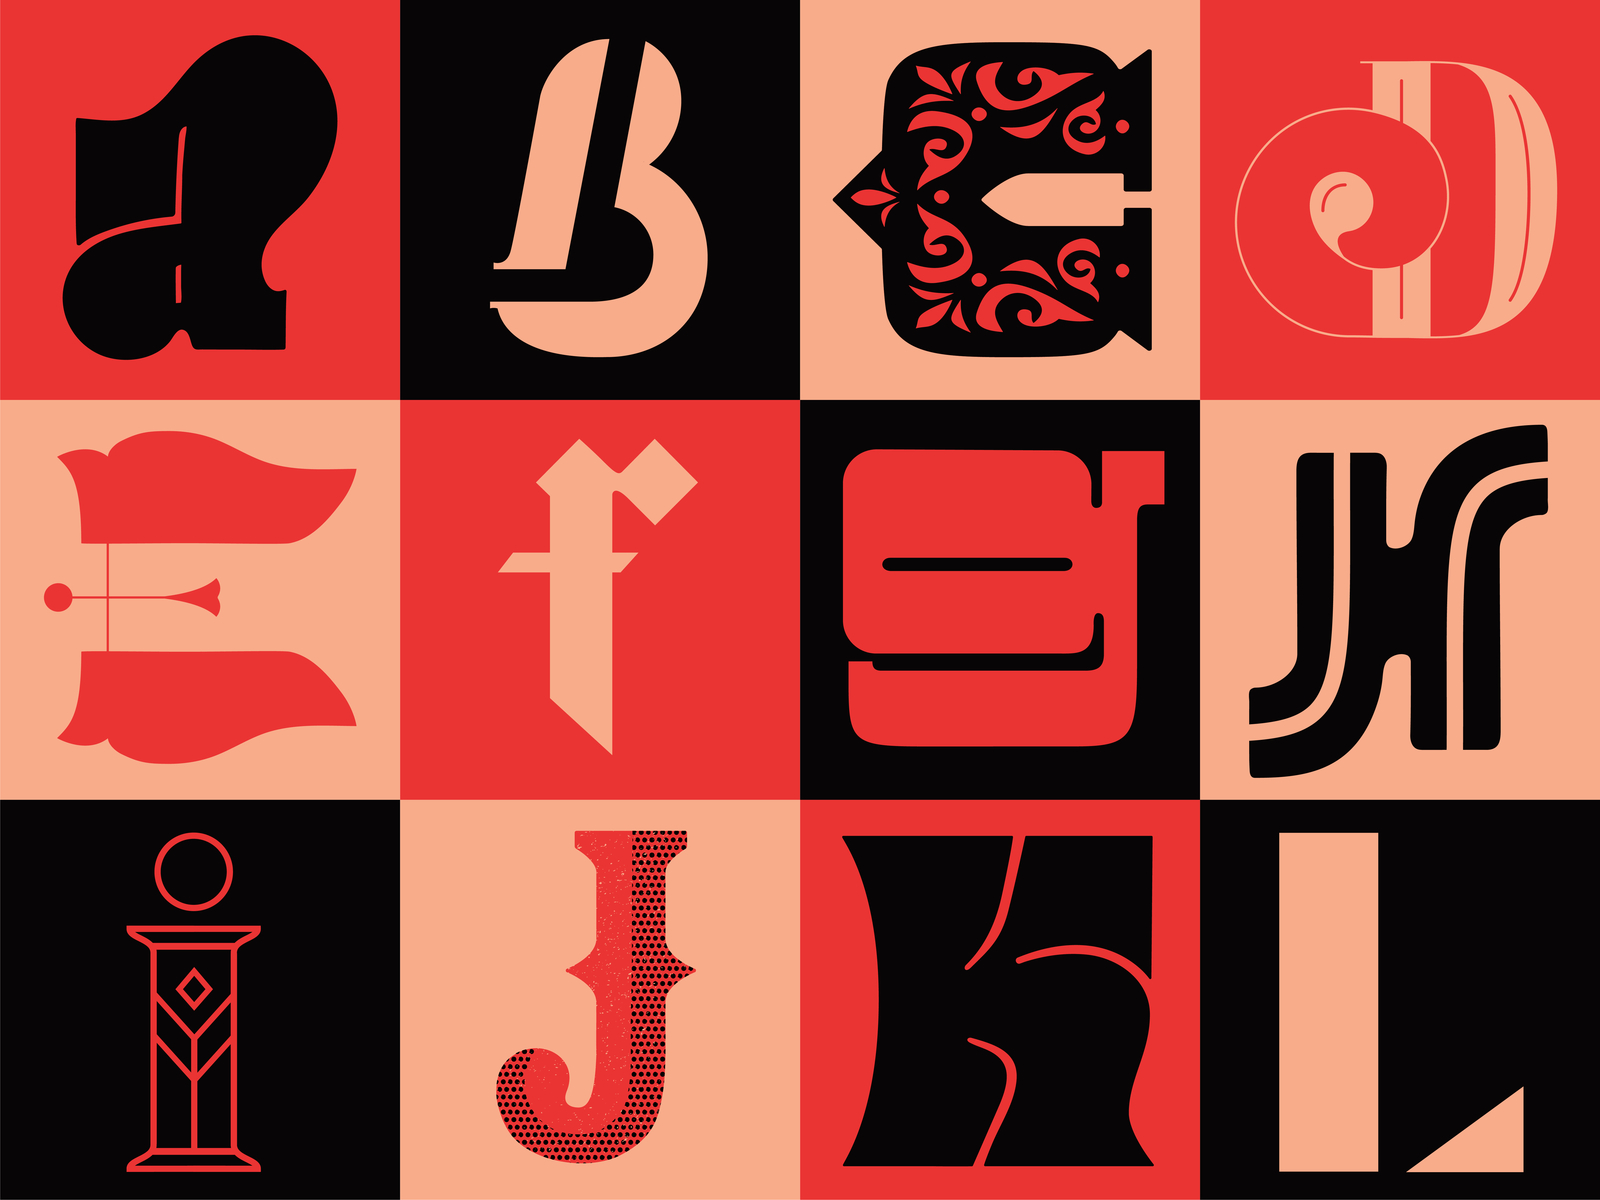 36 Days of Type: 2020 Summary by Debbie Trout on Dribbble